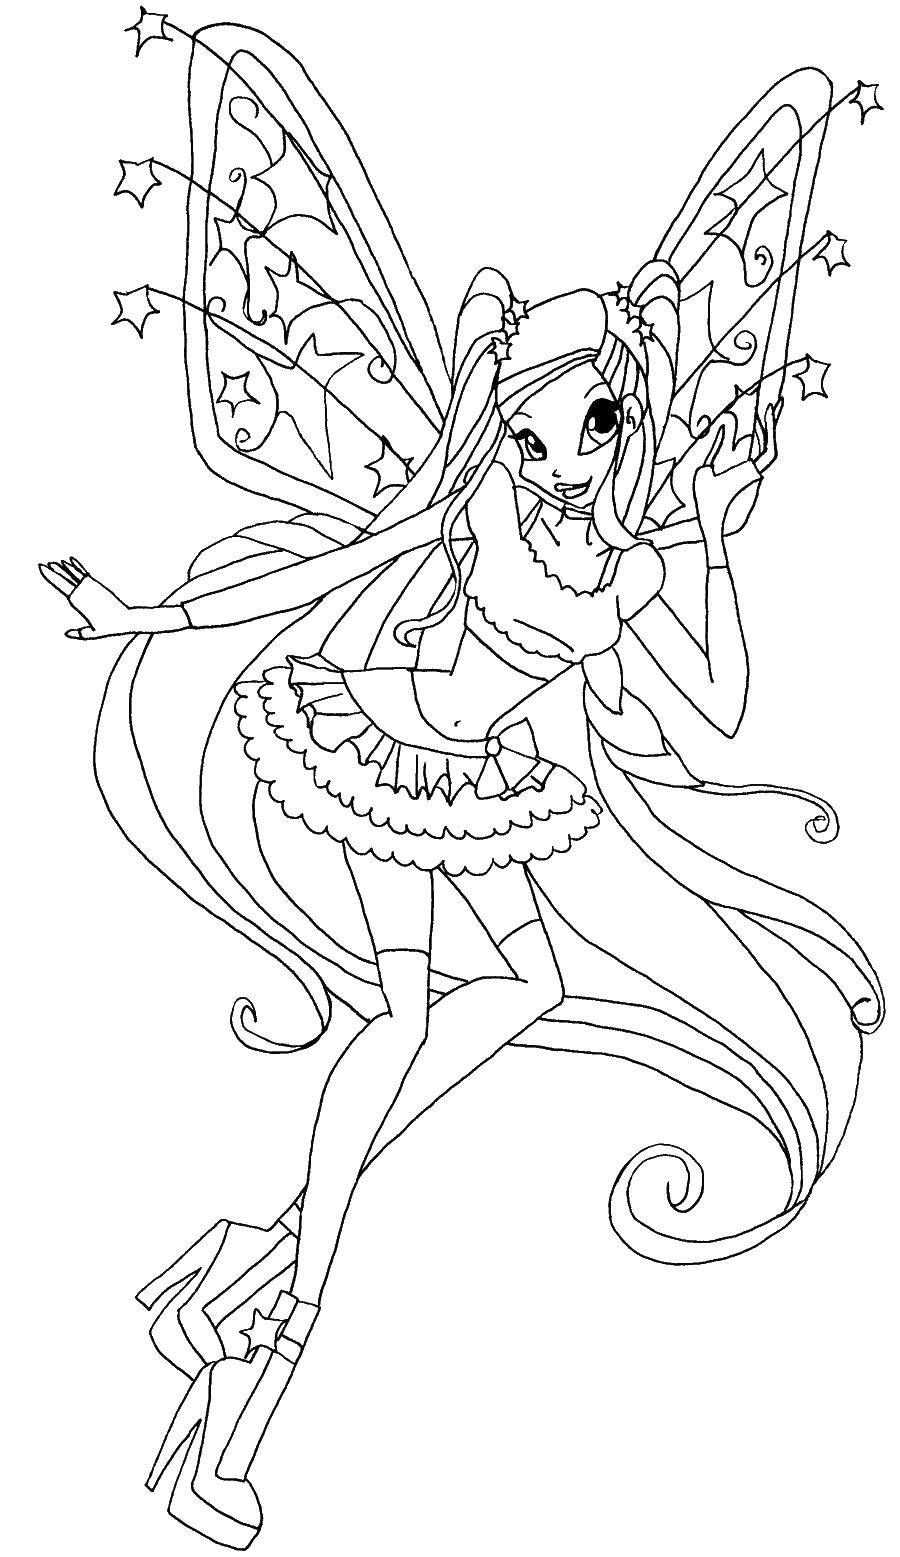 Coloring Stella on the heels. Category Winx club. Tags:  Character cartoon, Winx.